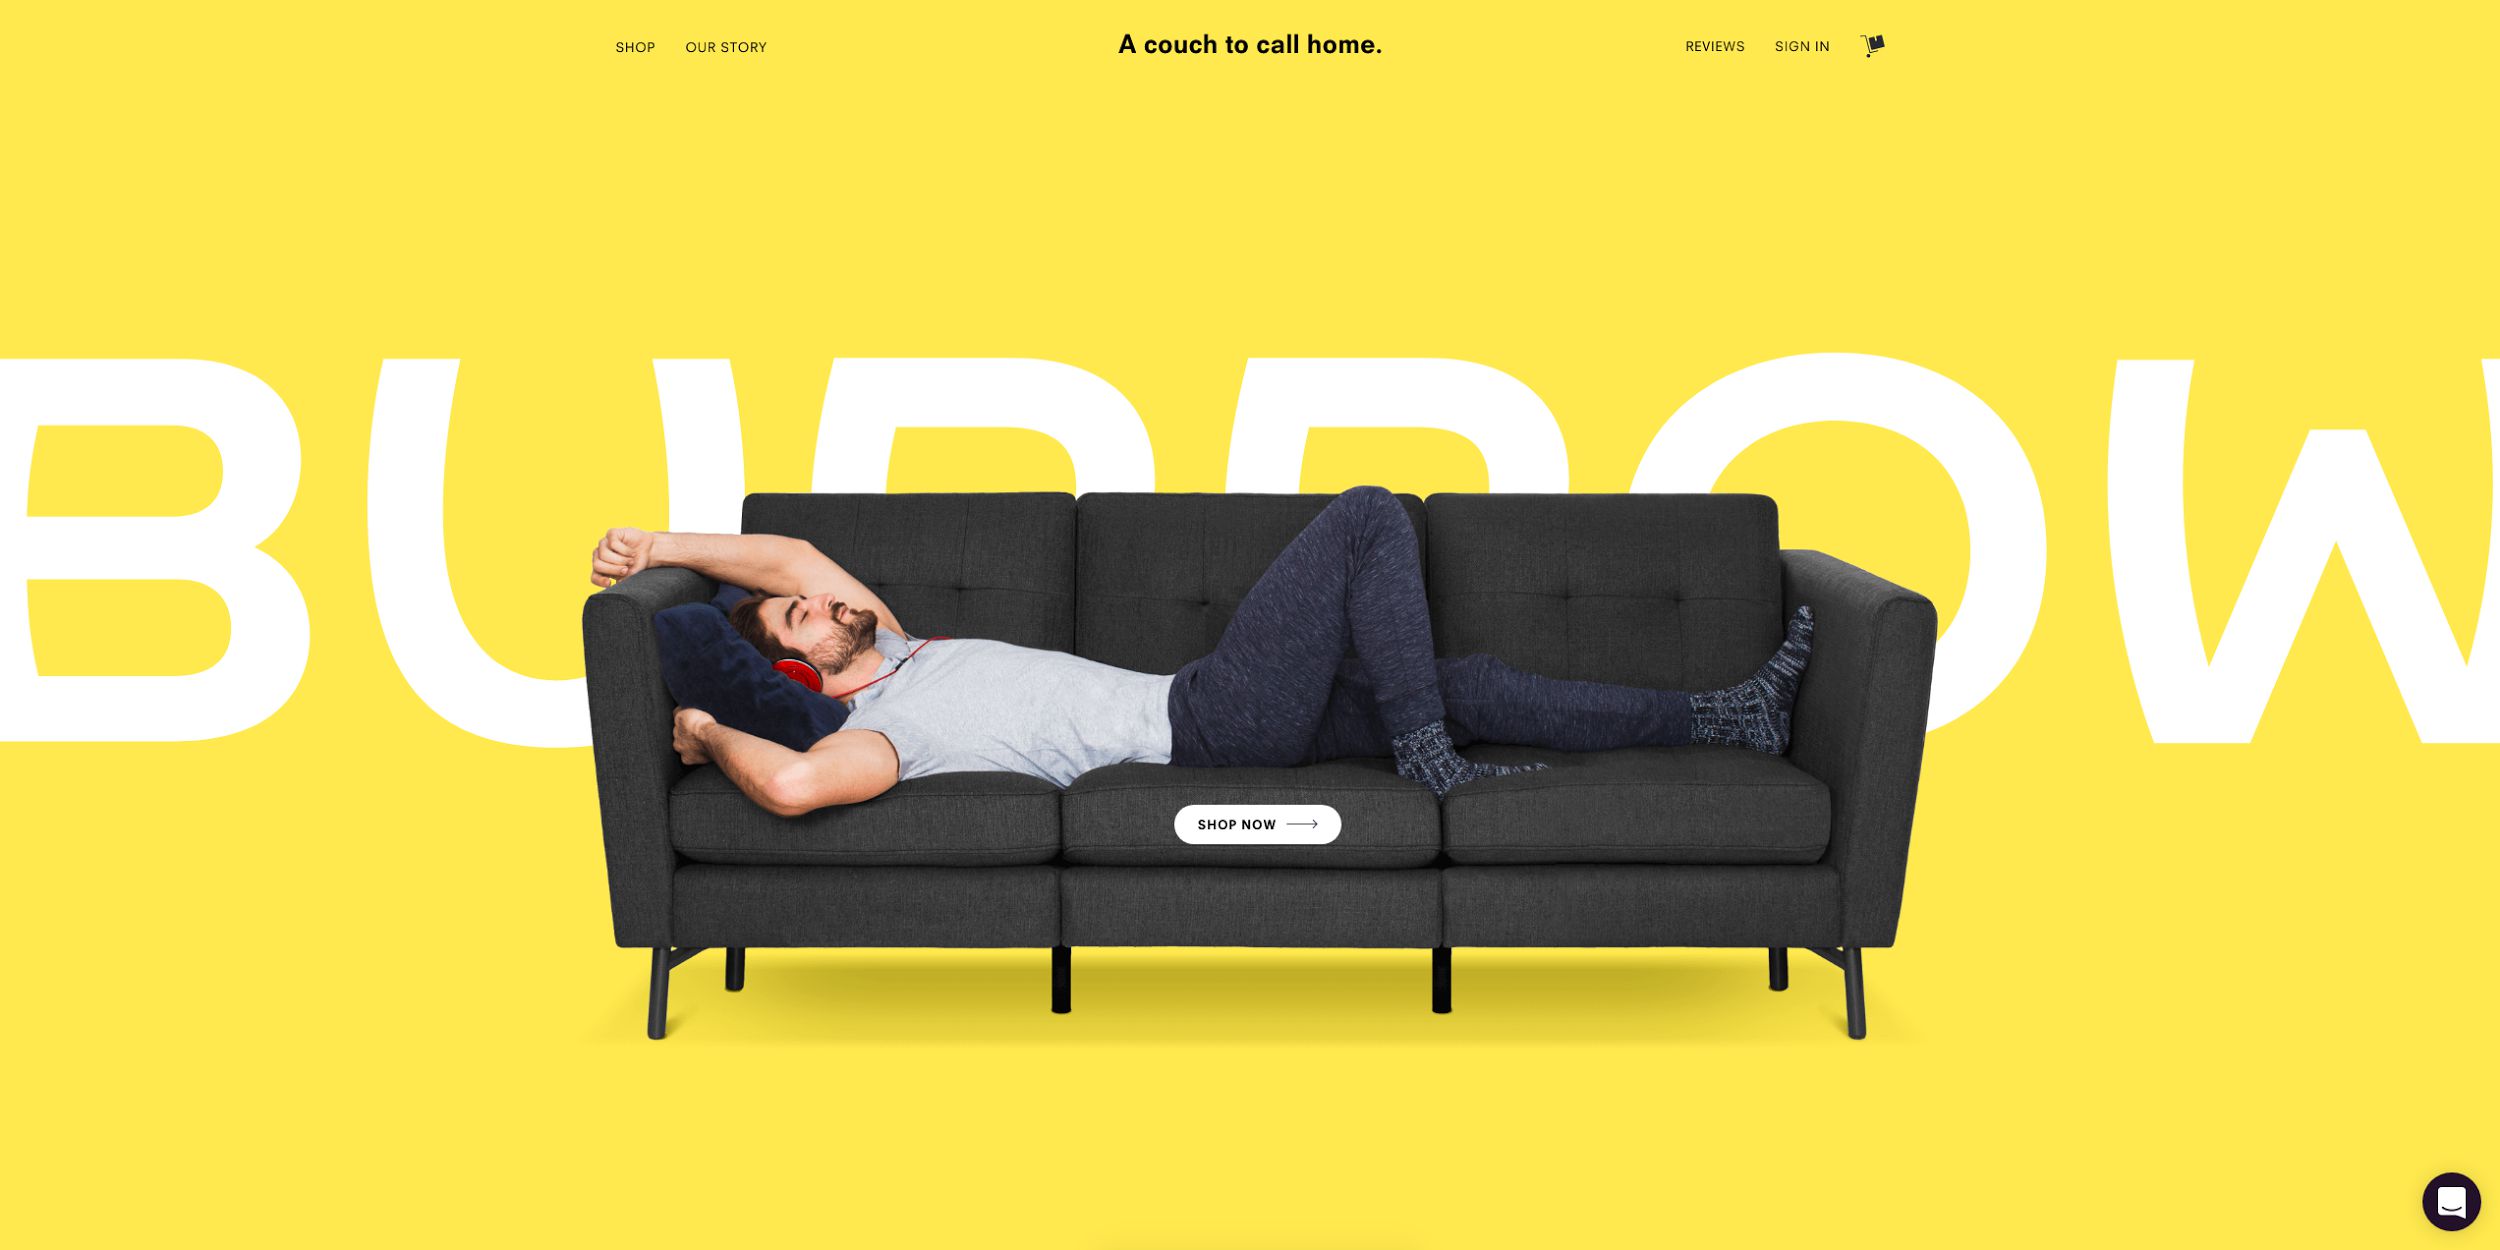 Seriously Bright Colorful Website Designs